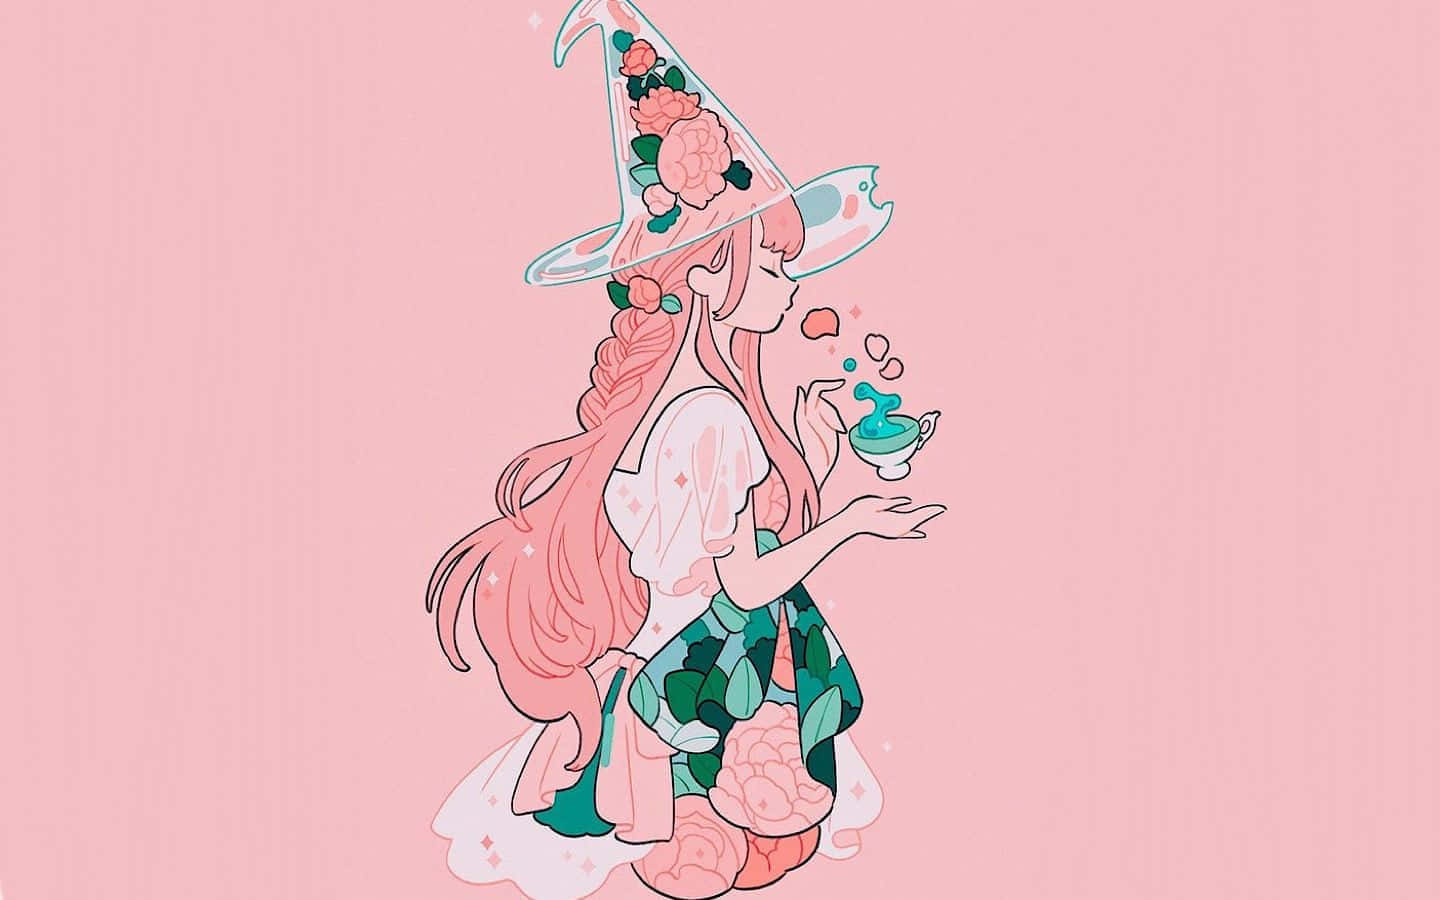 Pastel Witch Aesthetic Illustration Wallpaper